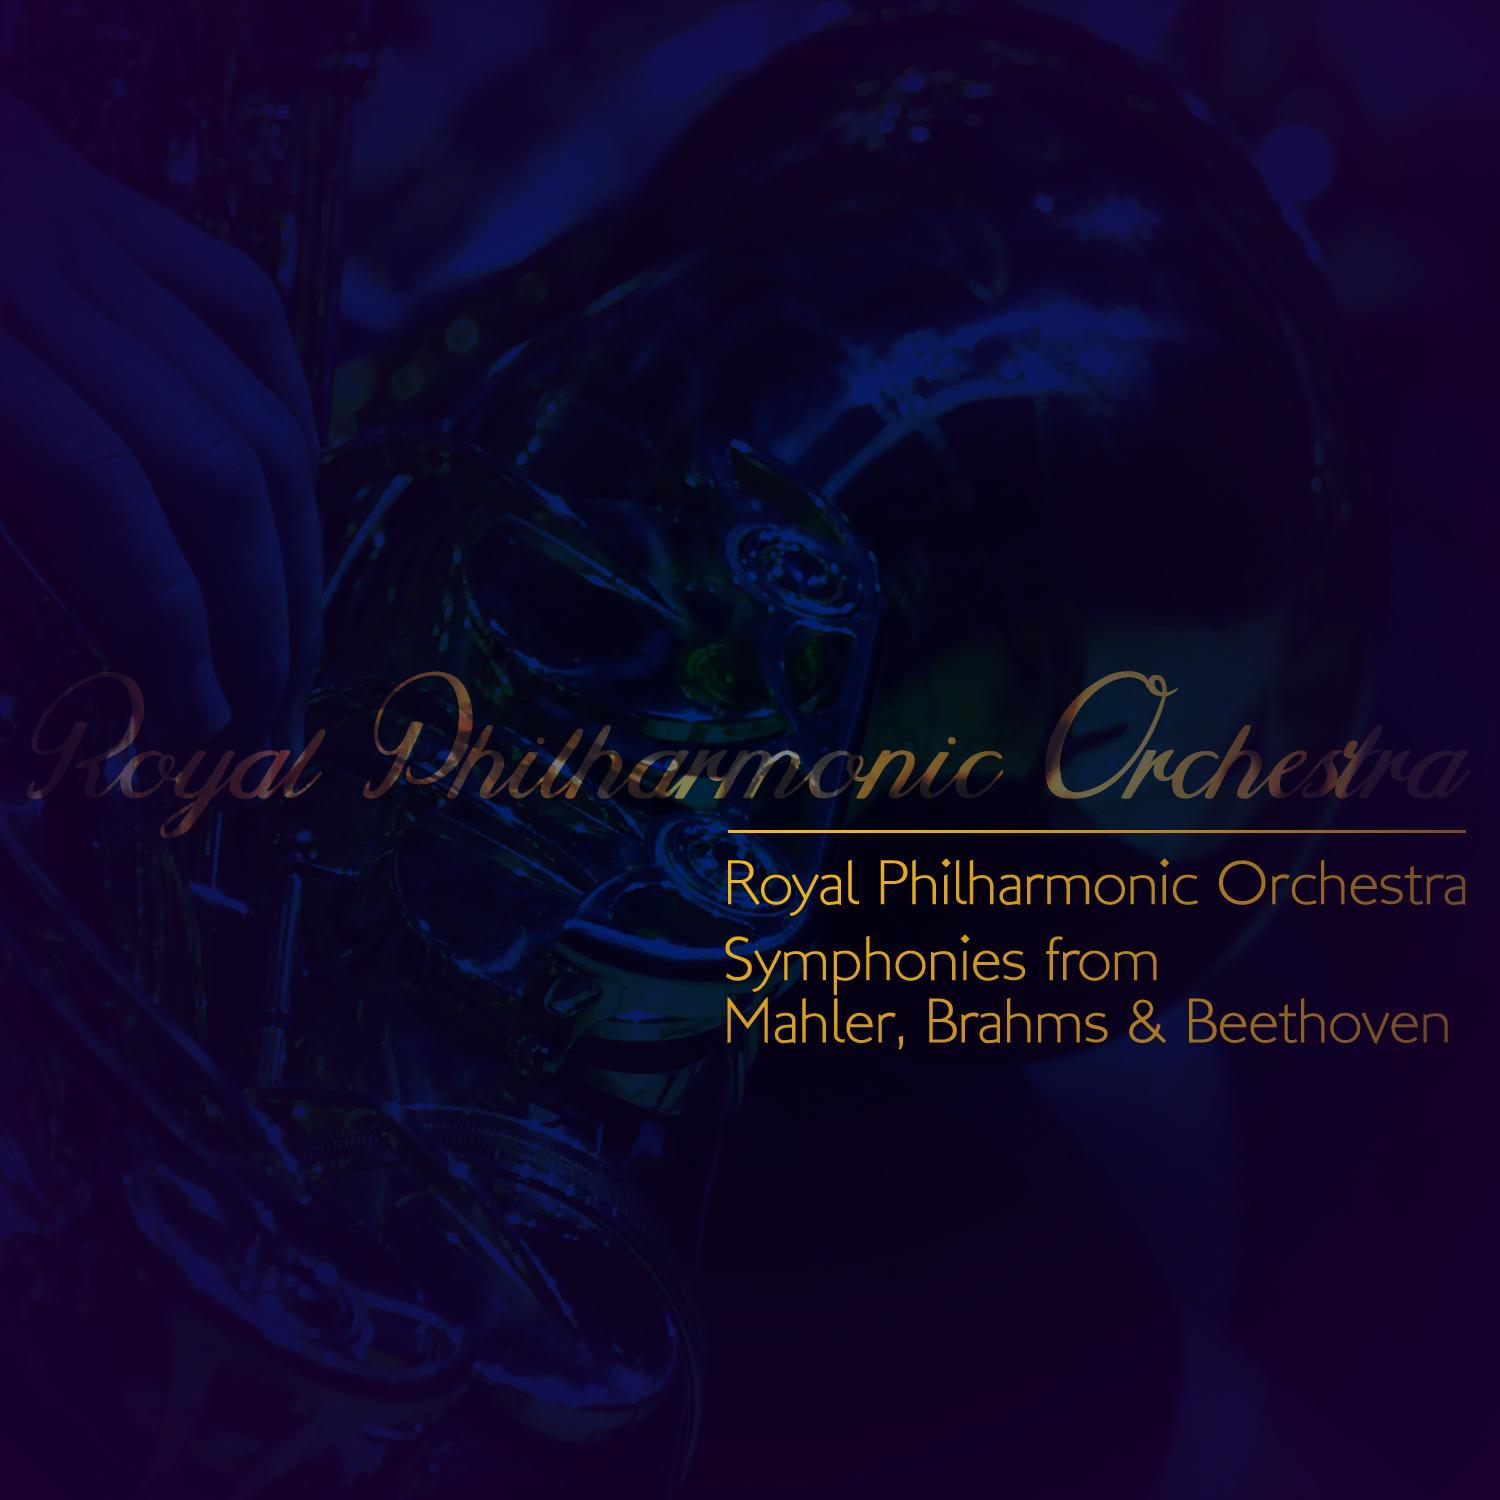 Royal Philharmonic Orchestra: Symphonies from Mahler, Brahms & Beethoven